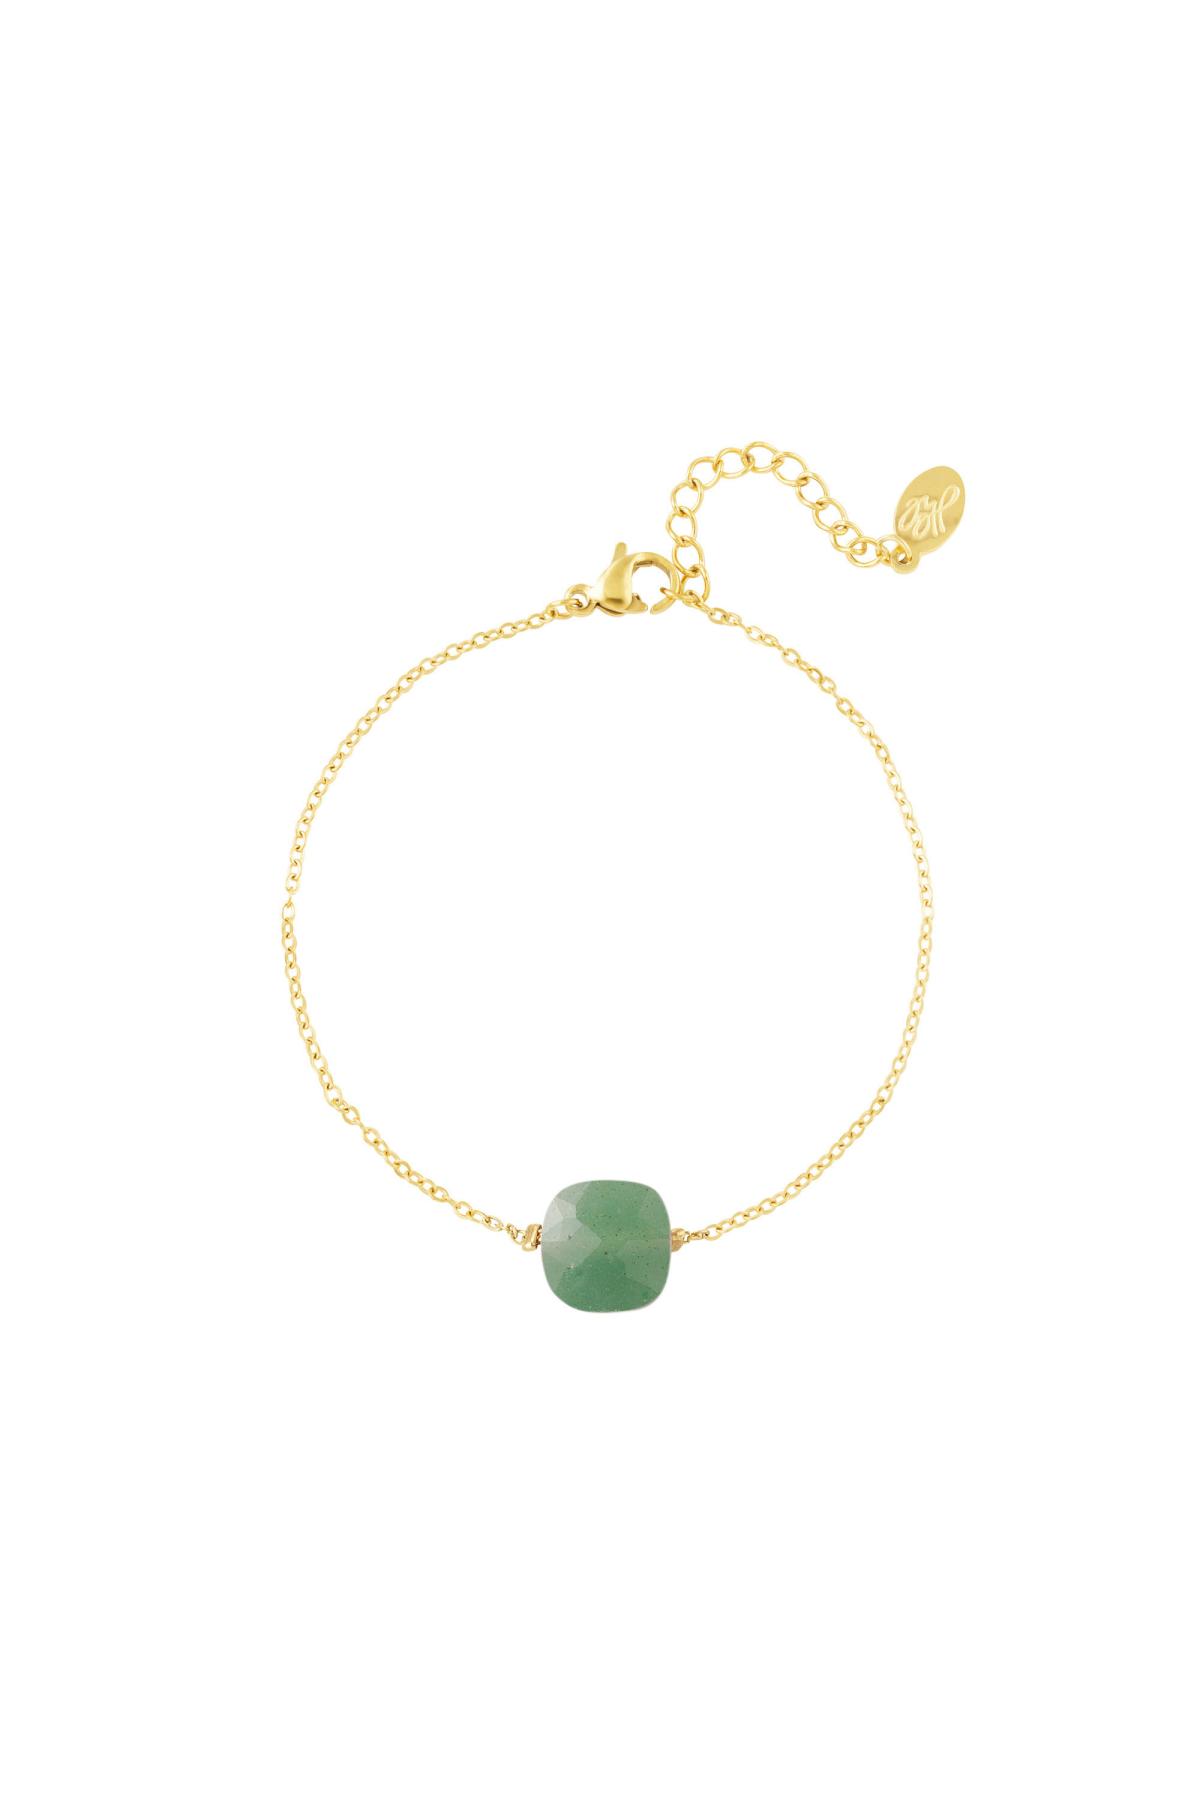 Bracelet with stone - Natural stones collection Green & Gold Stainless Steel 